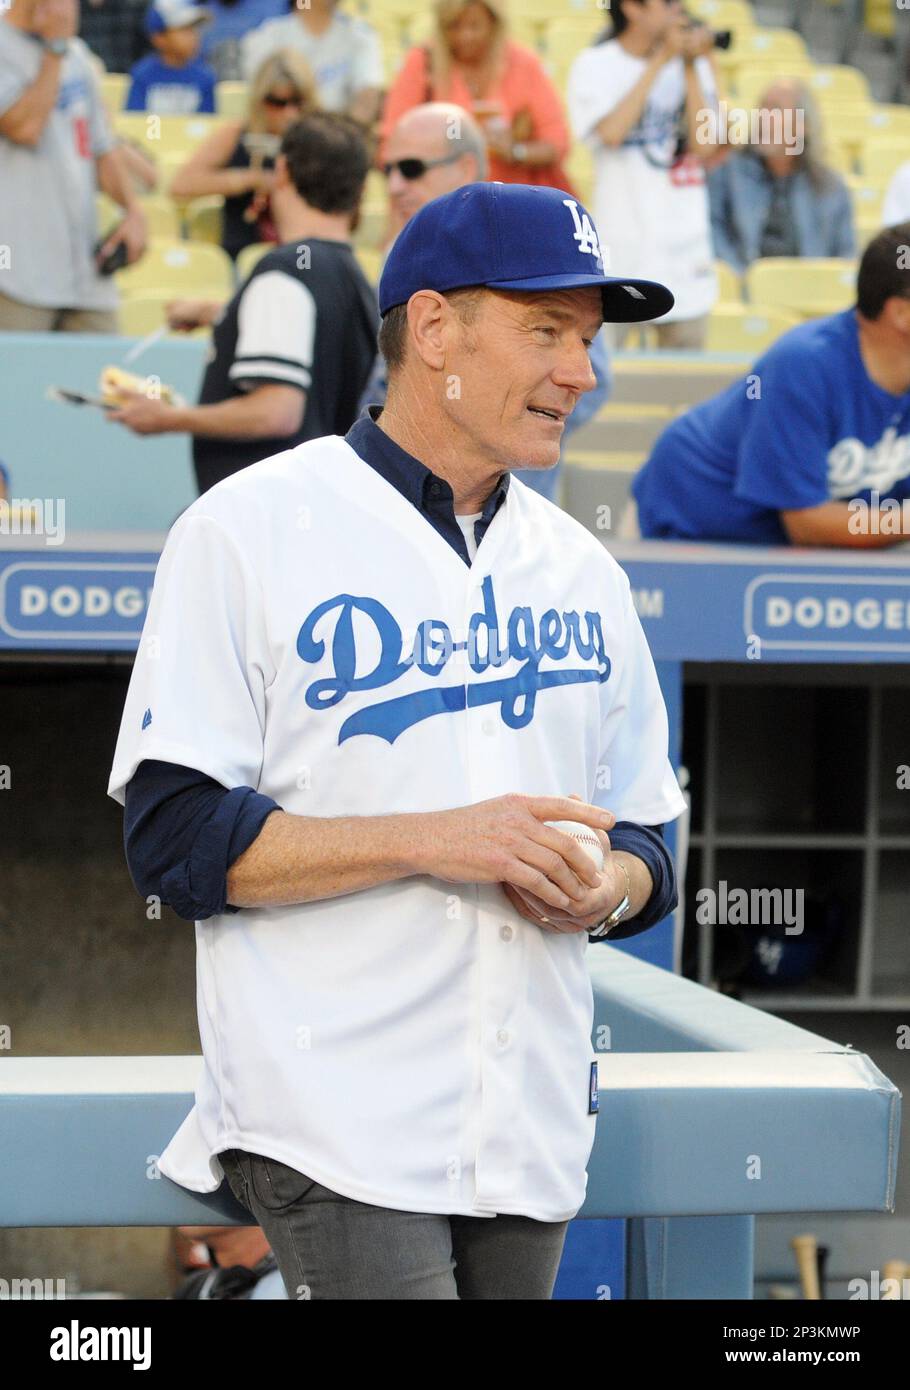 26 July 2013: Actor Bryan Cranston prior to throwing out the first pitch  during a Major League Baseball game between the Cincinnati Reds and the Los  Angeles Dodgers at Dodger Stadium in